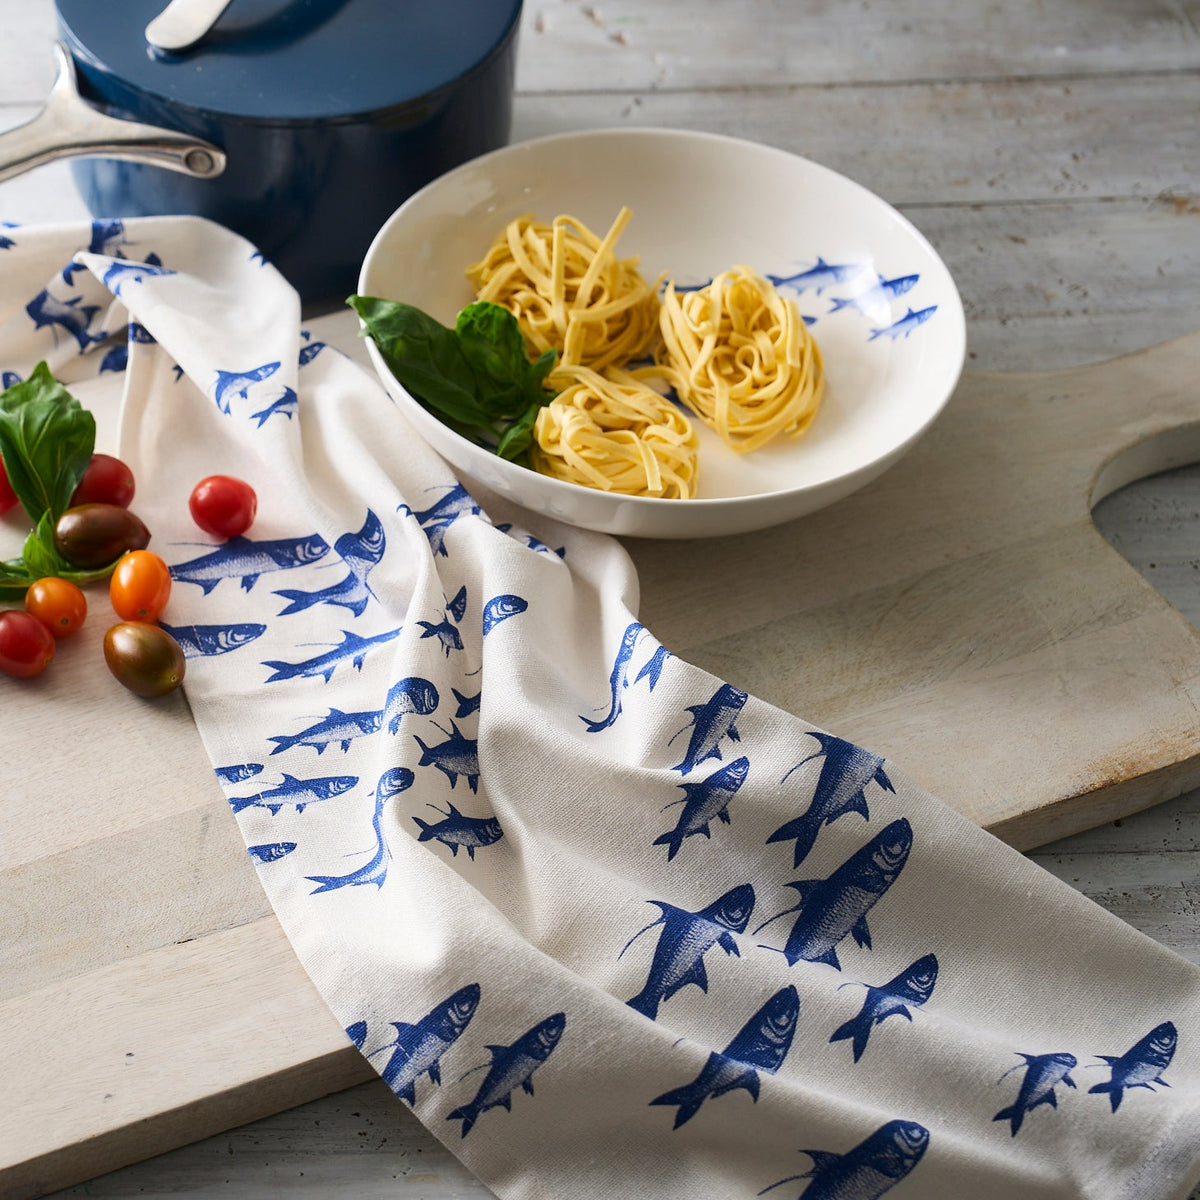 A bowl of pasta on a wooden table with a Caskata School of Fish Kitchen Towel, Set of 2, cherry tomatoes, basil, and a cooking pot in the background.